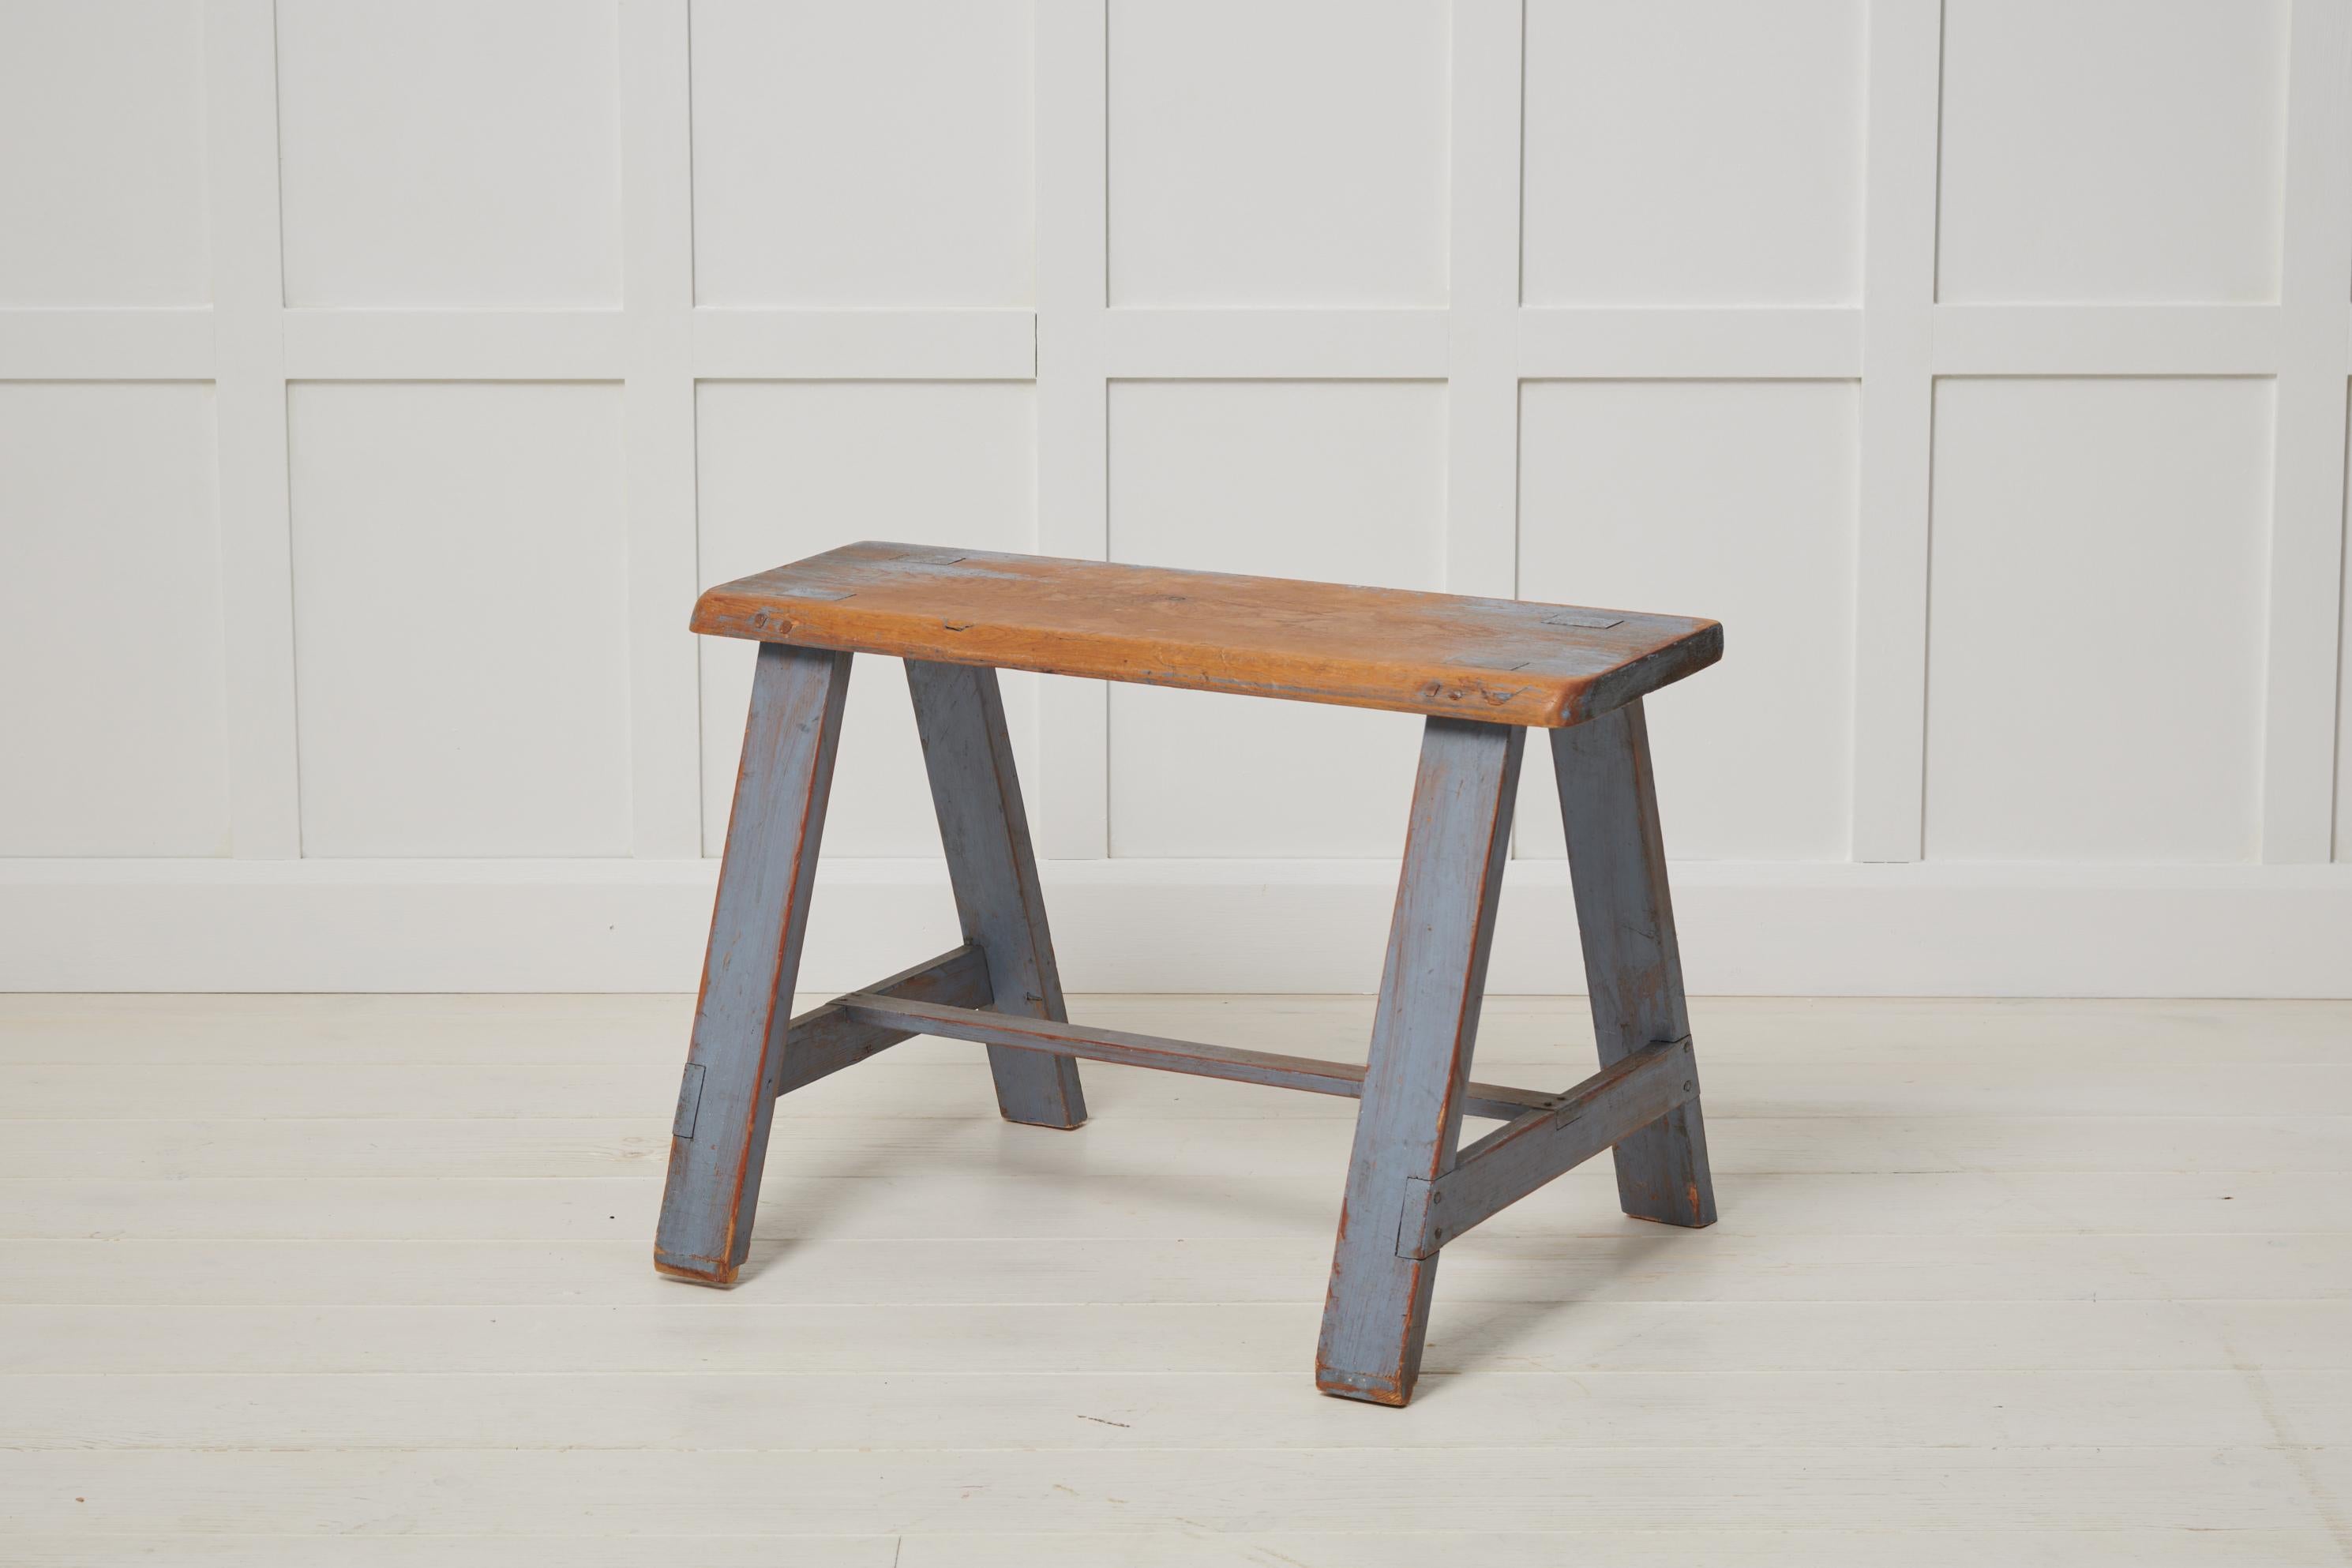 Small antique Swedish bench in folk art. The frame is made by hand in solid Swedish pine. The original light blue paint has genuine distress and patina after use which lets the pine underneath show in places. The bench was made in northern Sweden